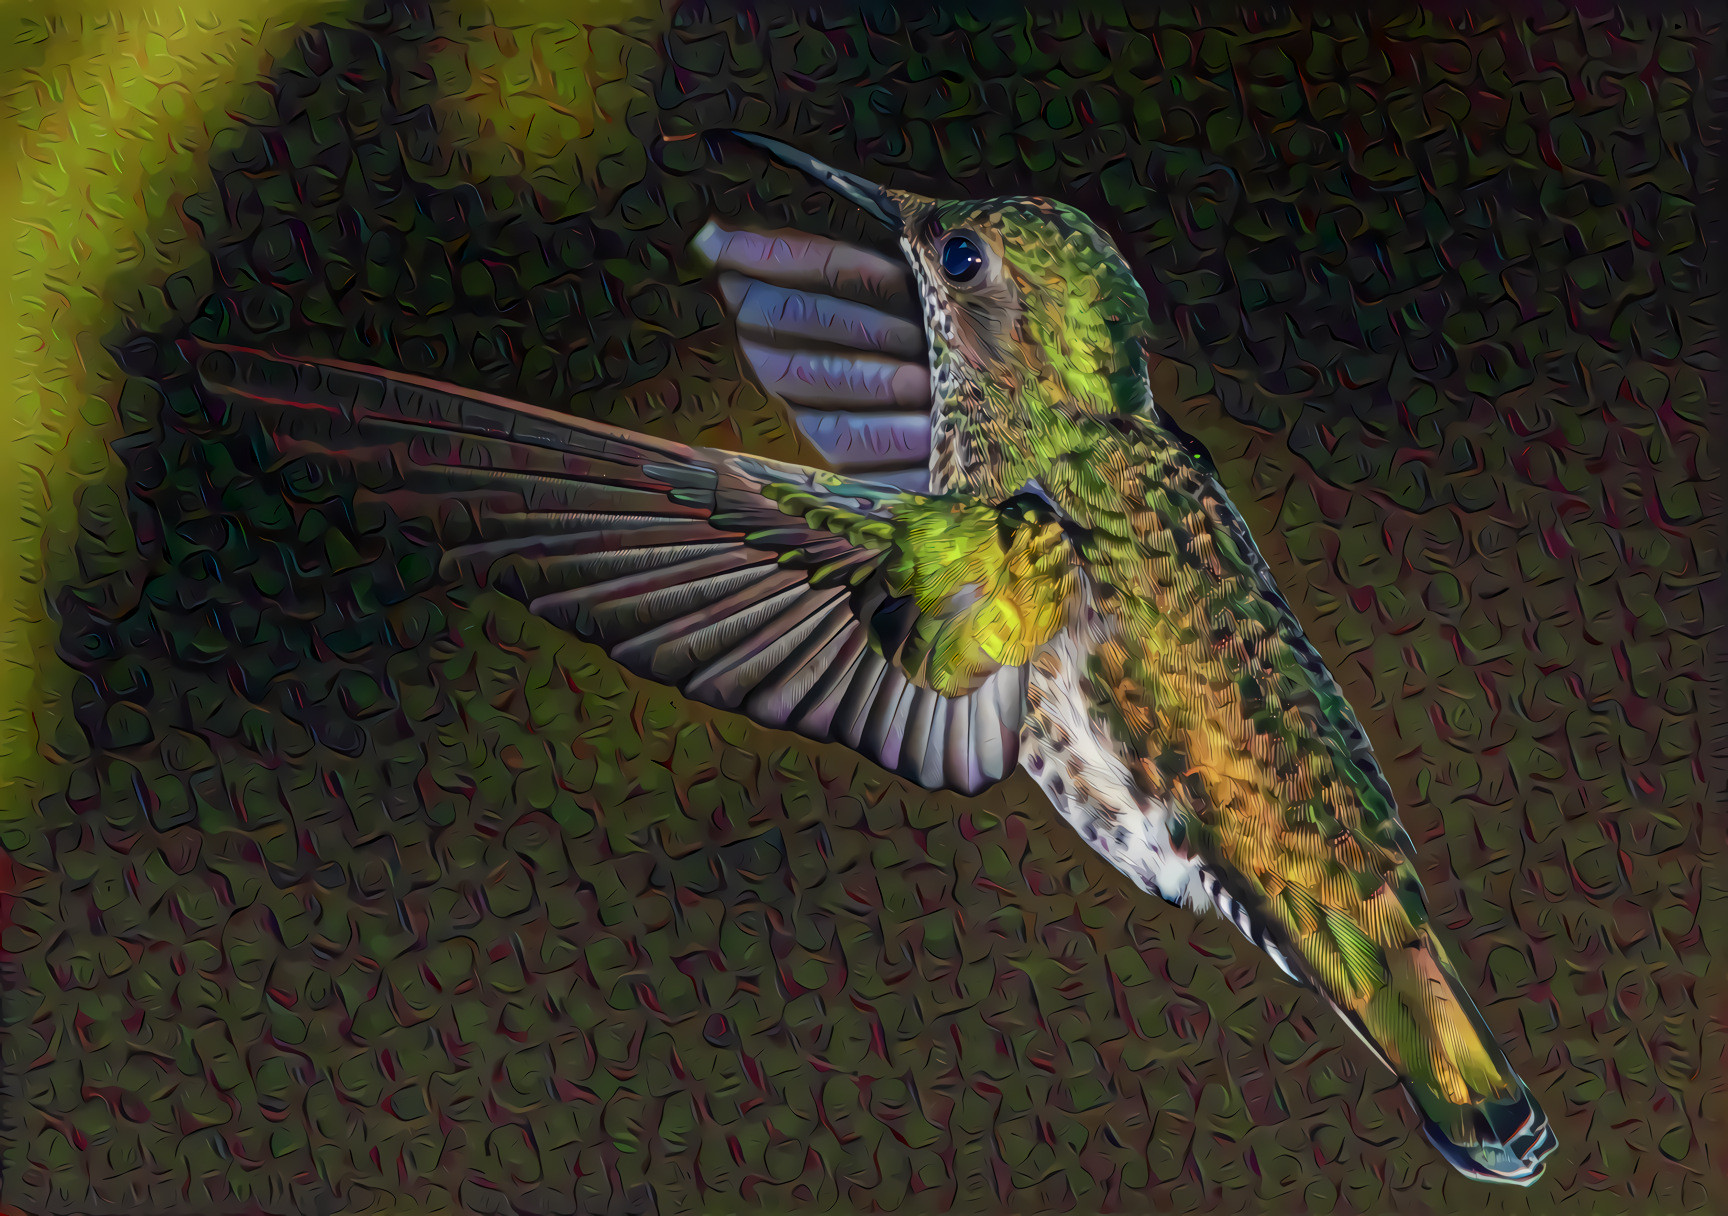 Green-crowned Brilliant Hummingbird in Flight.  Source photo by Chris Charles on Unsplash.